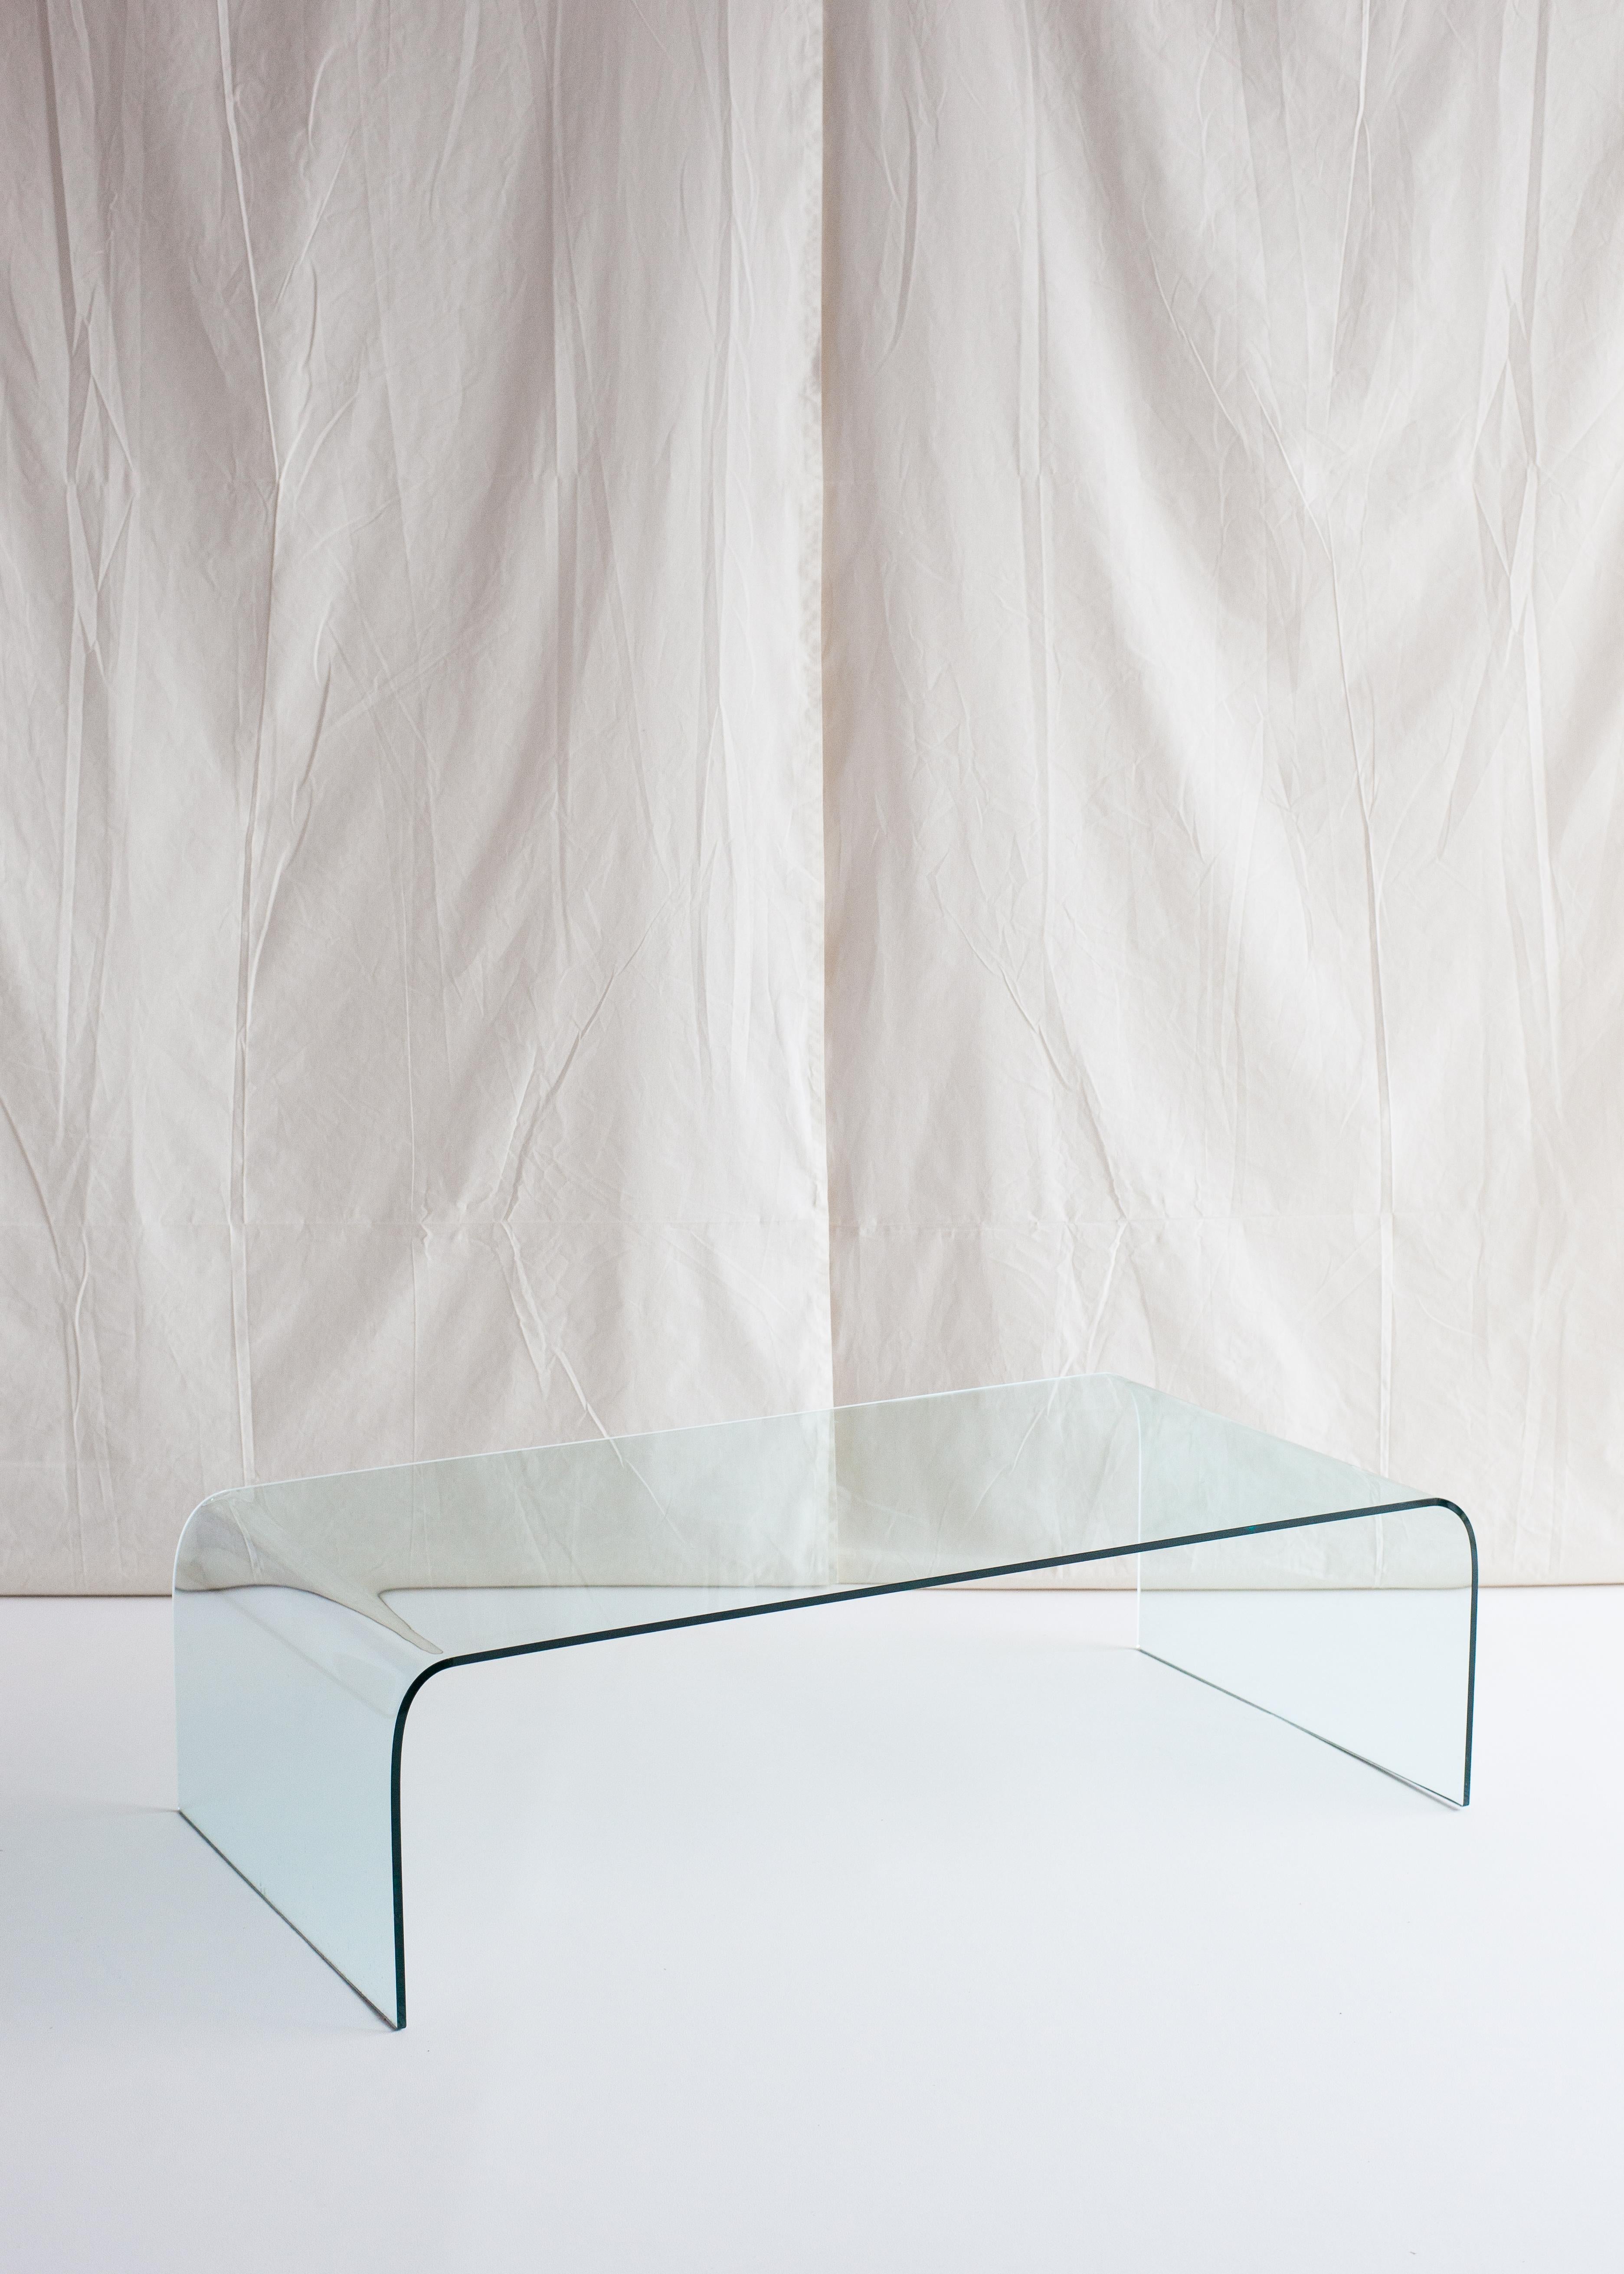 The Waterfall coffee table by Angelo Cortesi for Fiam, 1970s 

Already in 1932 Pietro Chiesa realised the first coffee table in one single piece of curved glass! In the 80s Angelo Cortesi, inspired by his predecessor and using the latest glass